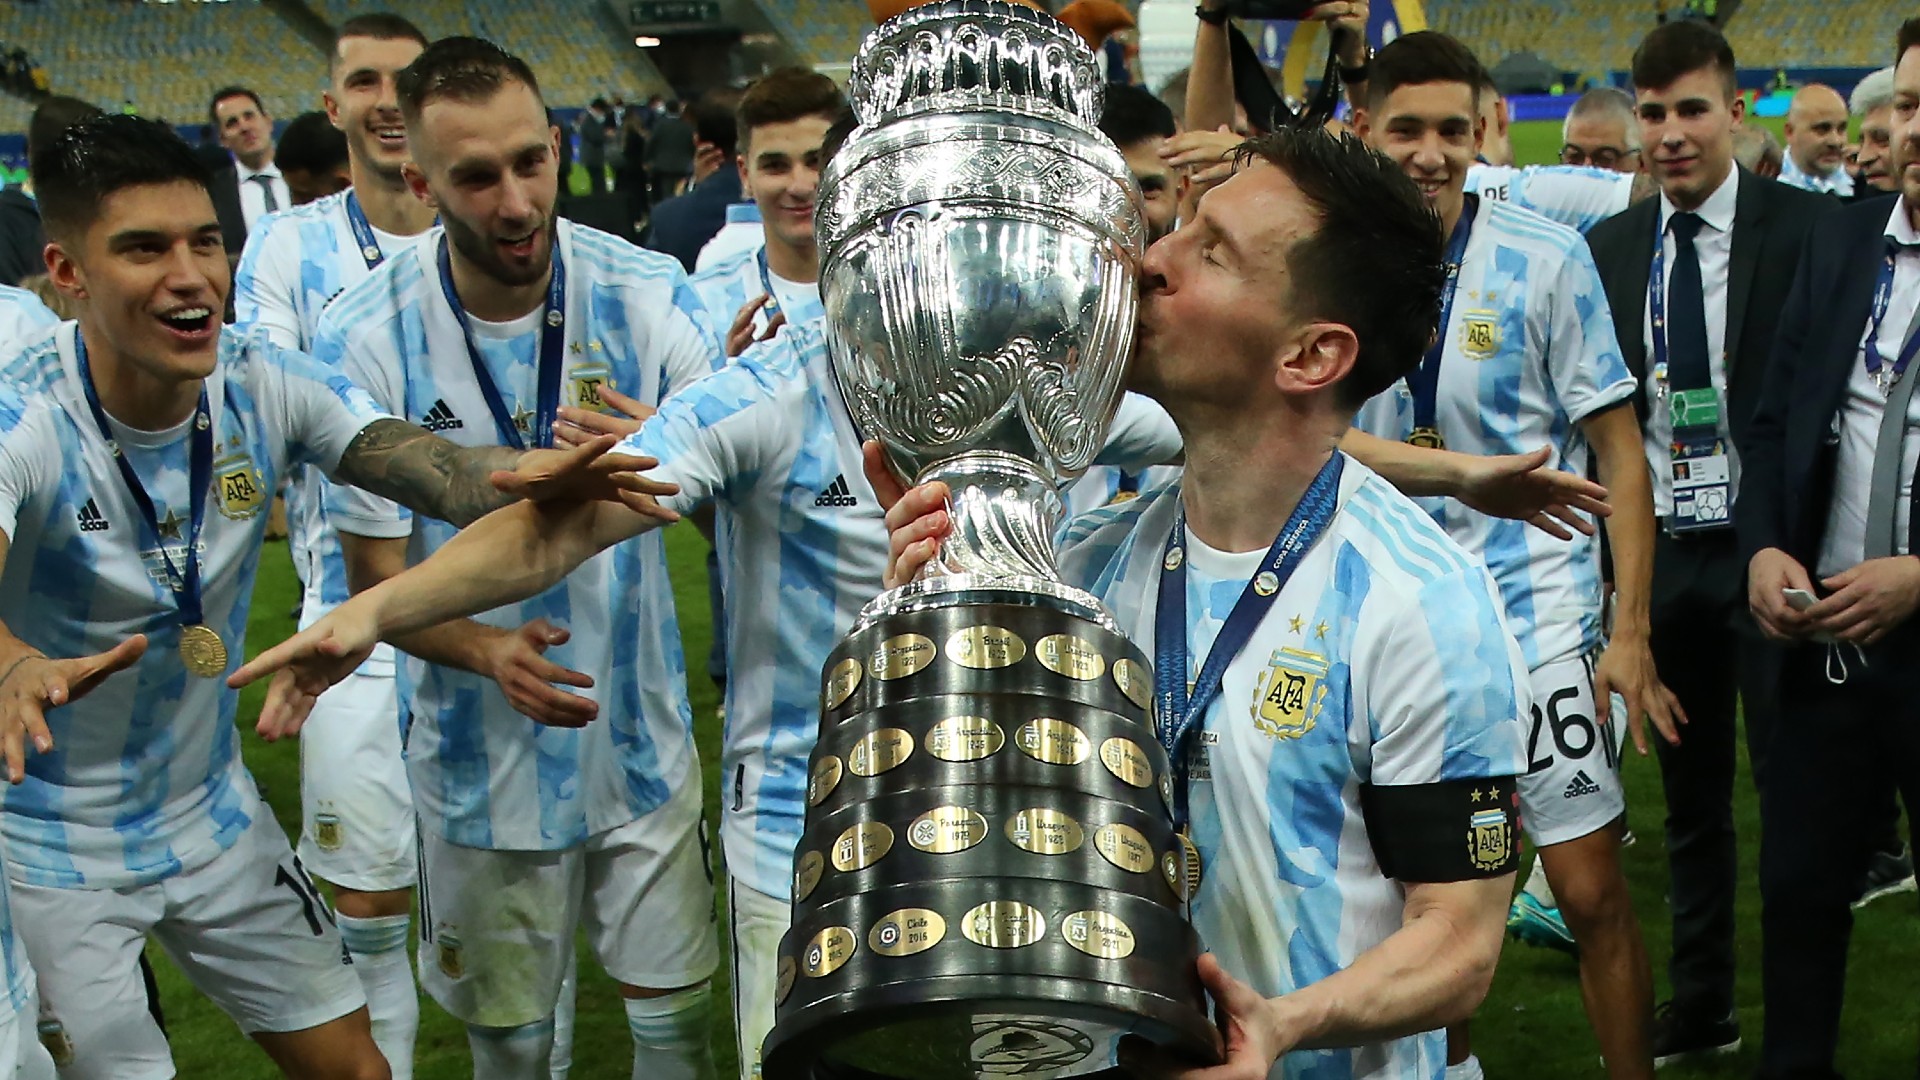 lionel messi celebrates argentina's copa américa victory with an instagram post full of profanity - news block